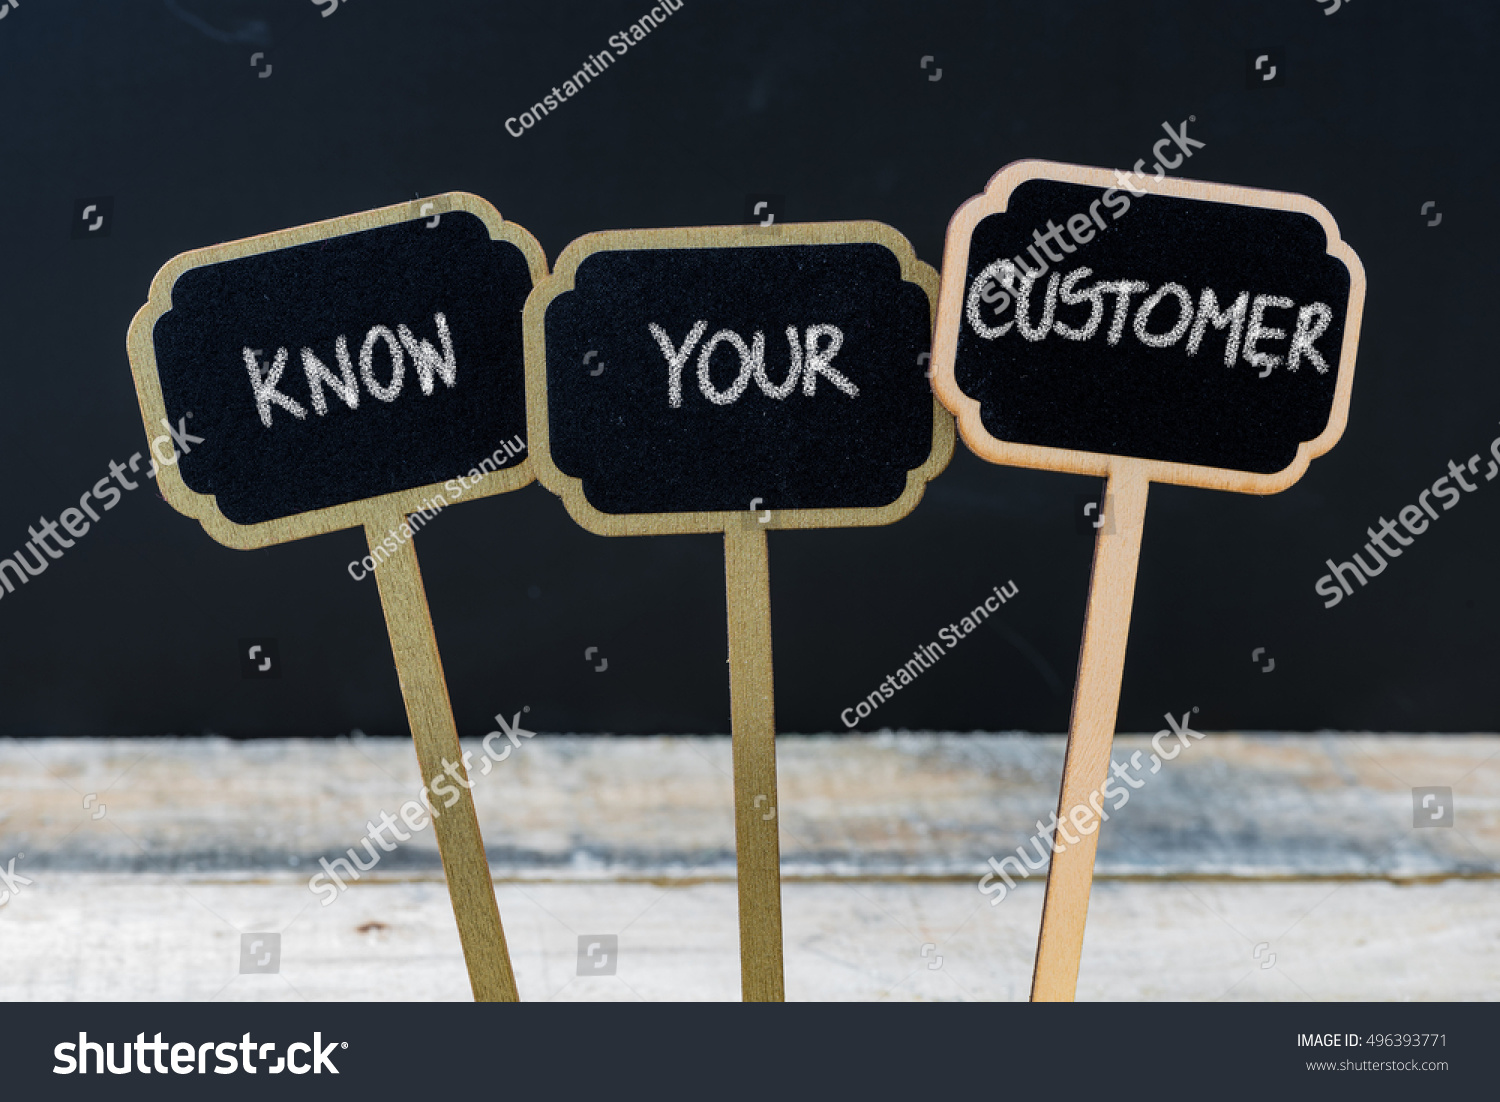 Business message KNOW YOUR CUSTOMER written with chalk on wooden mini blackboard labels, defocused chalkboard and wood table in background #496393771